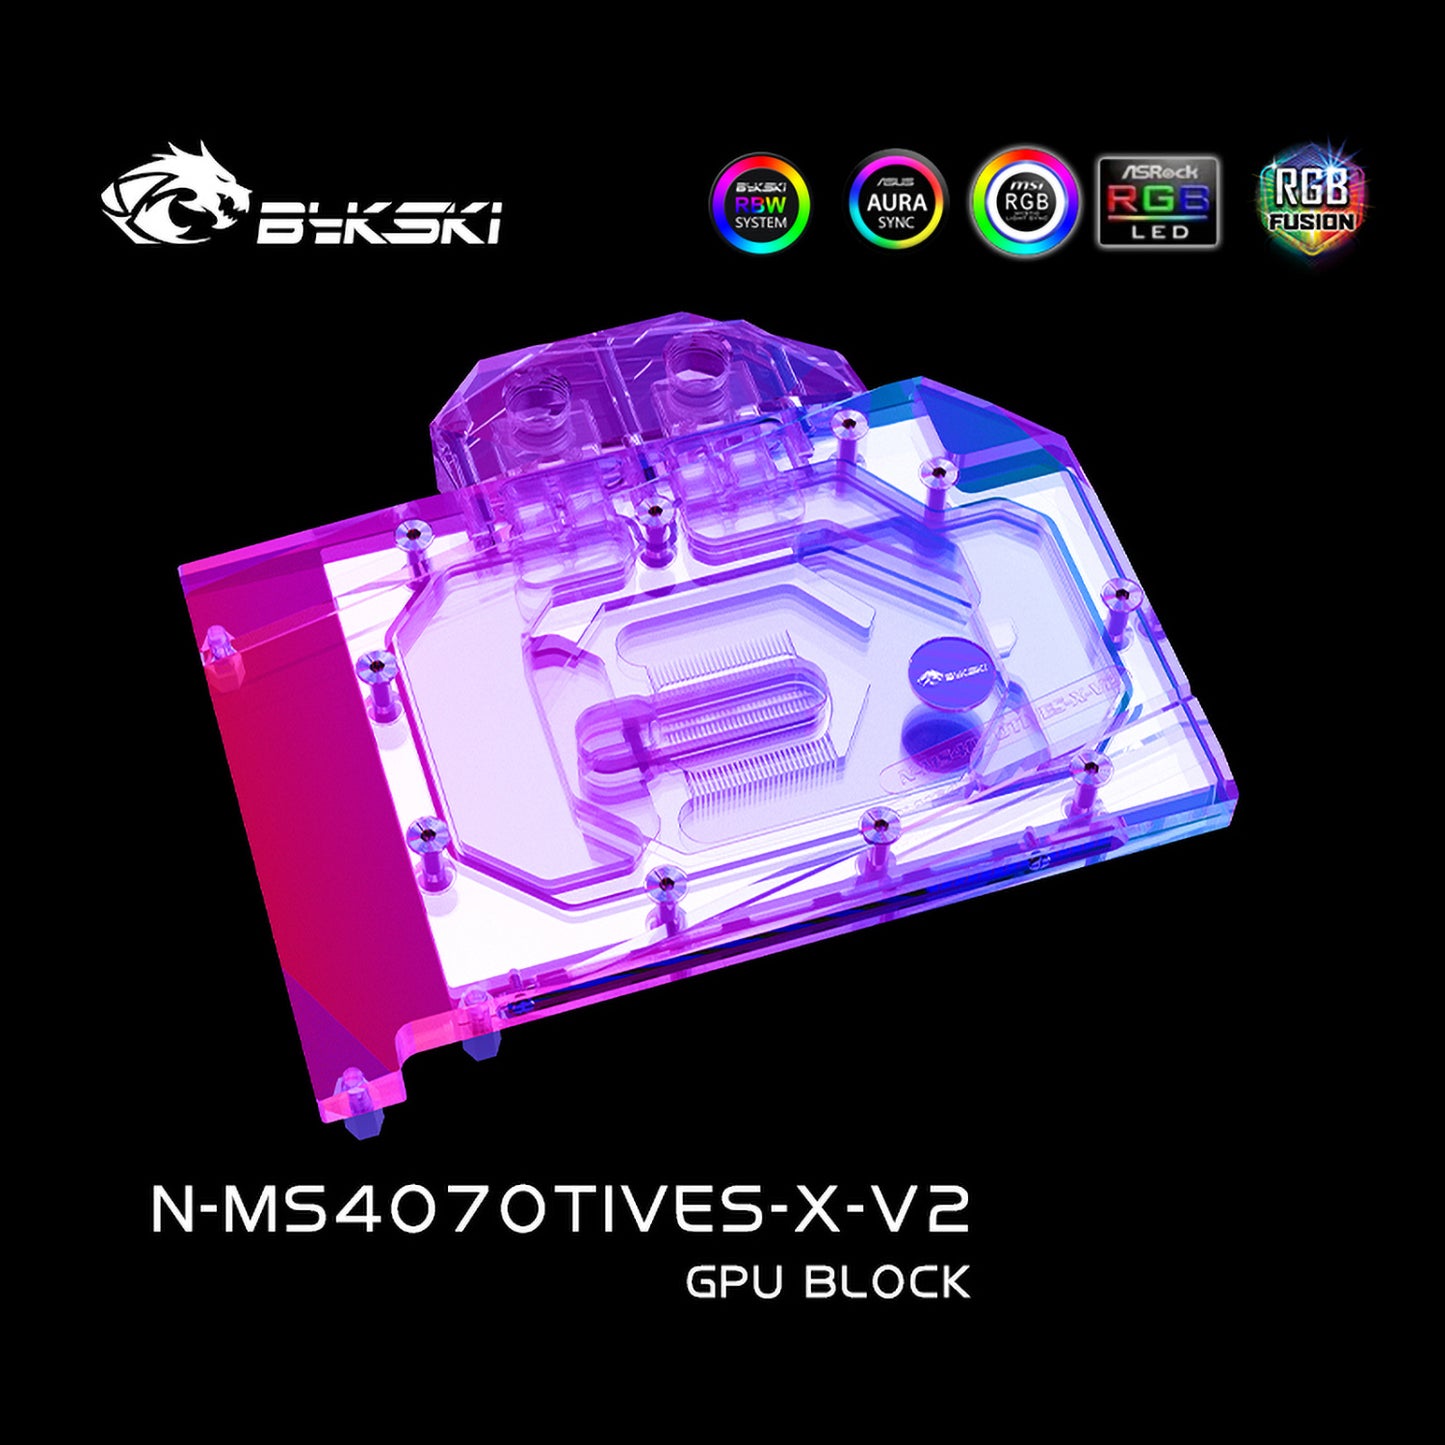 Bykski GPU Water Block For MSI RTX 4070 Ti Ventus 3X / 4070 Ventus 3X 2X/ 4070 Gaming X Trio, Full Cover With Backplate PC Water Cooling Cooler, N-MS4070TIVES-X-V2